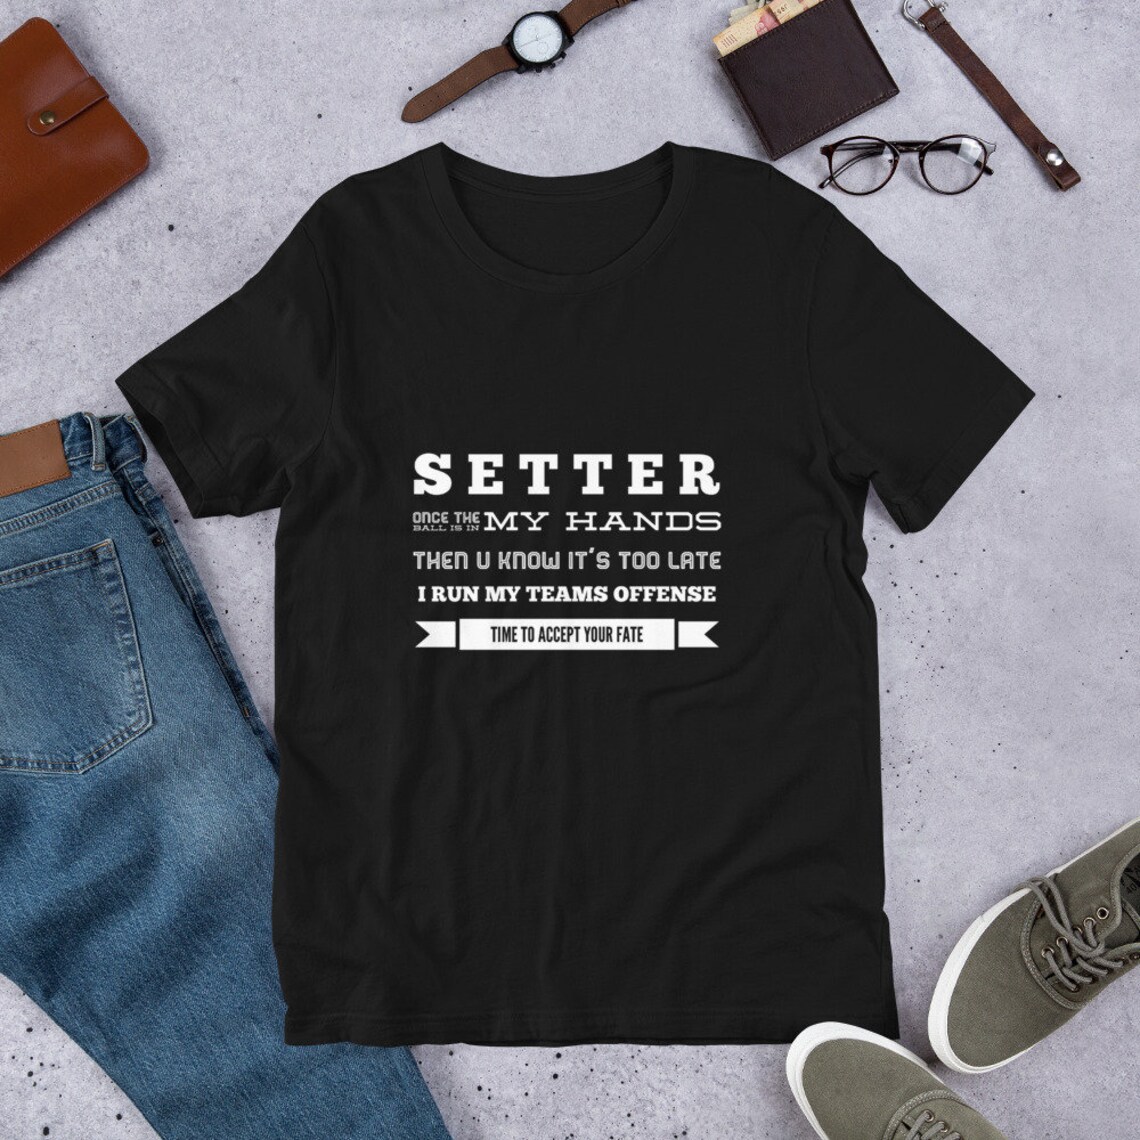 Setter, When The Ball Is In My Hands. Buy these cute volleyball shirts for girls with quotes about playing volleyball which make cool gifts for players and are available in my ETSY shop!